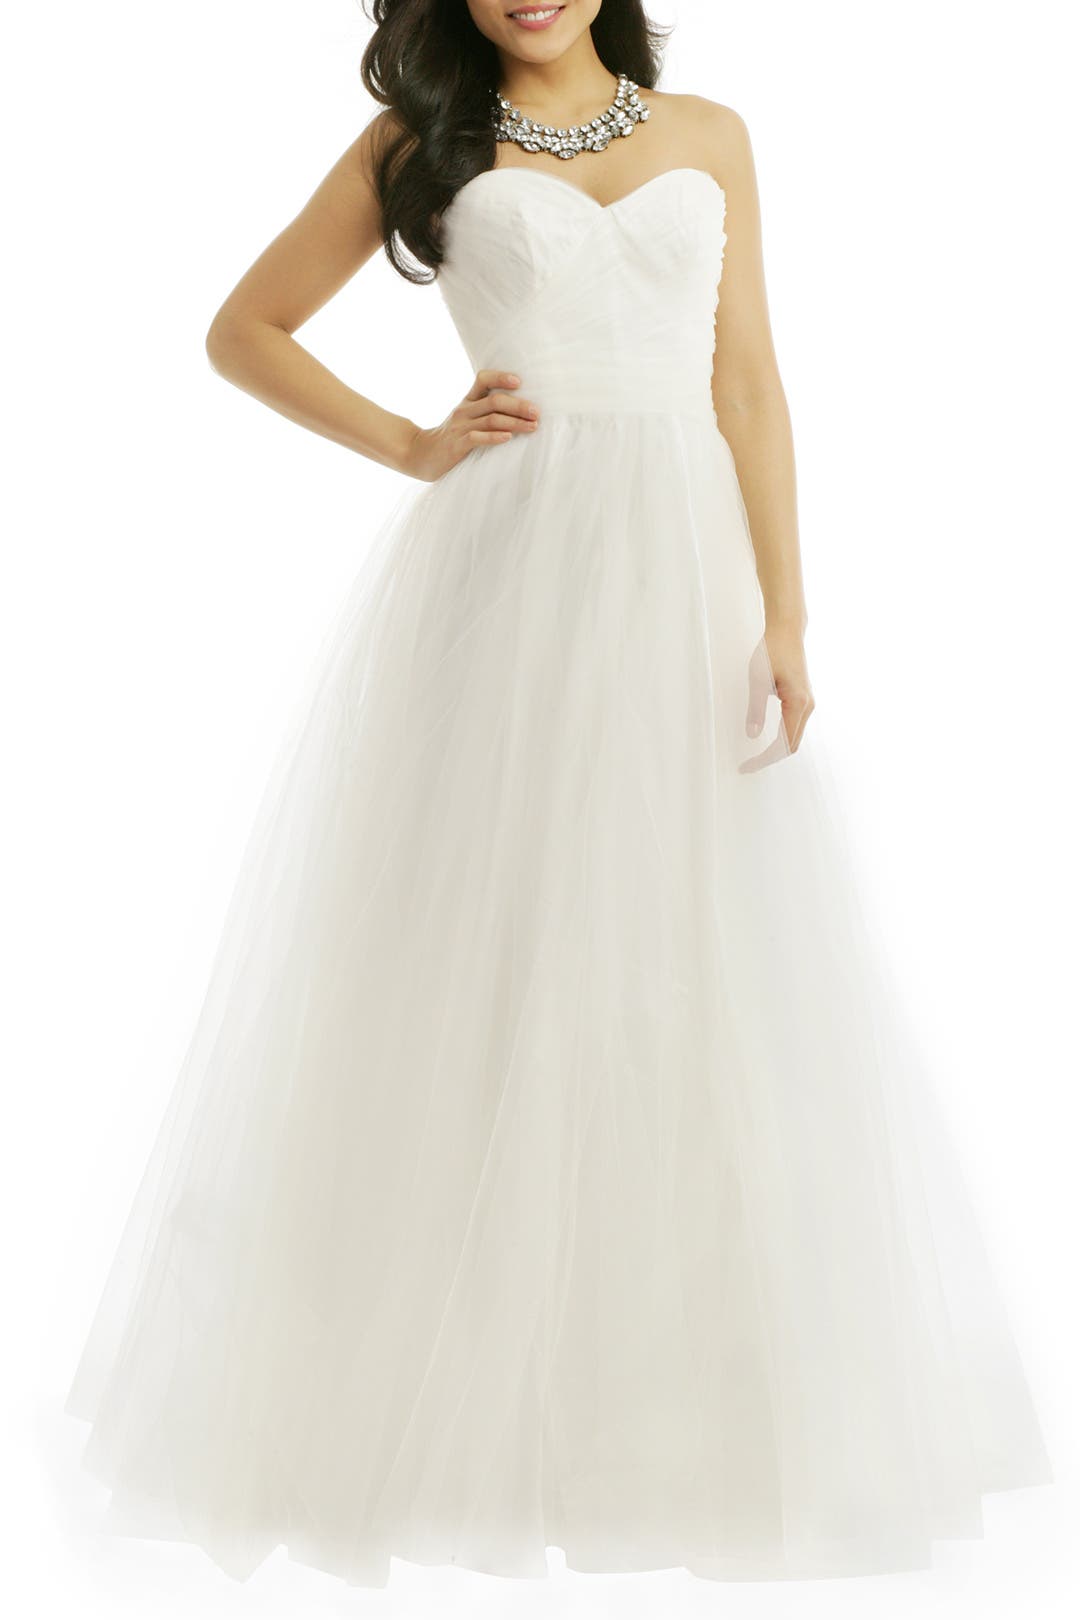 Say I Do Tulle Gown by Theia for $179